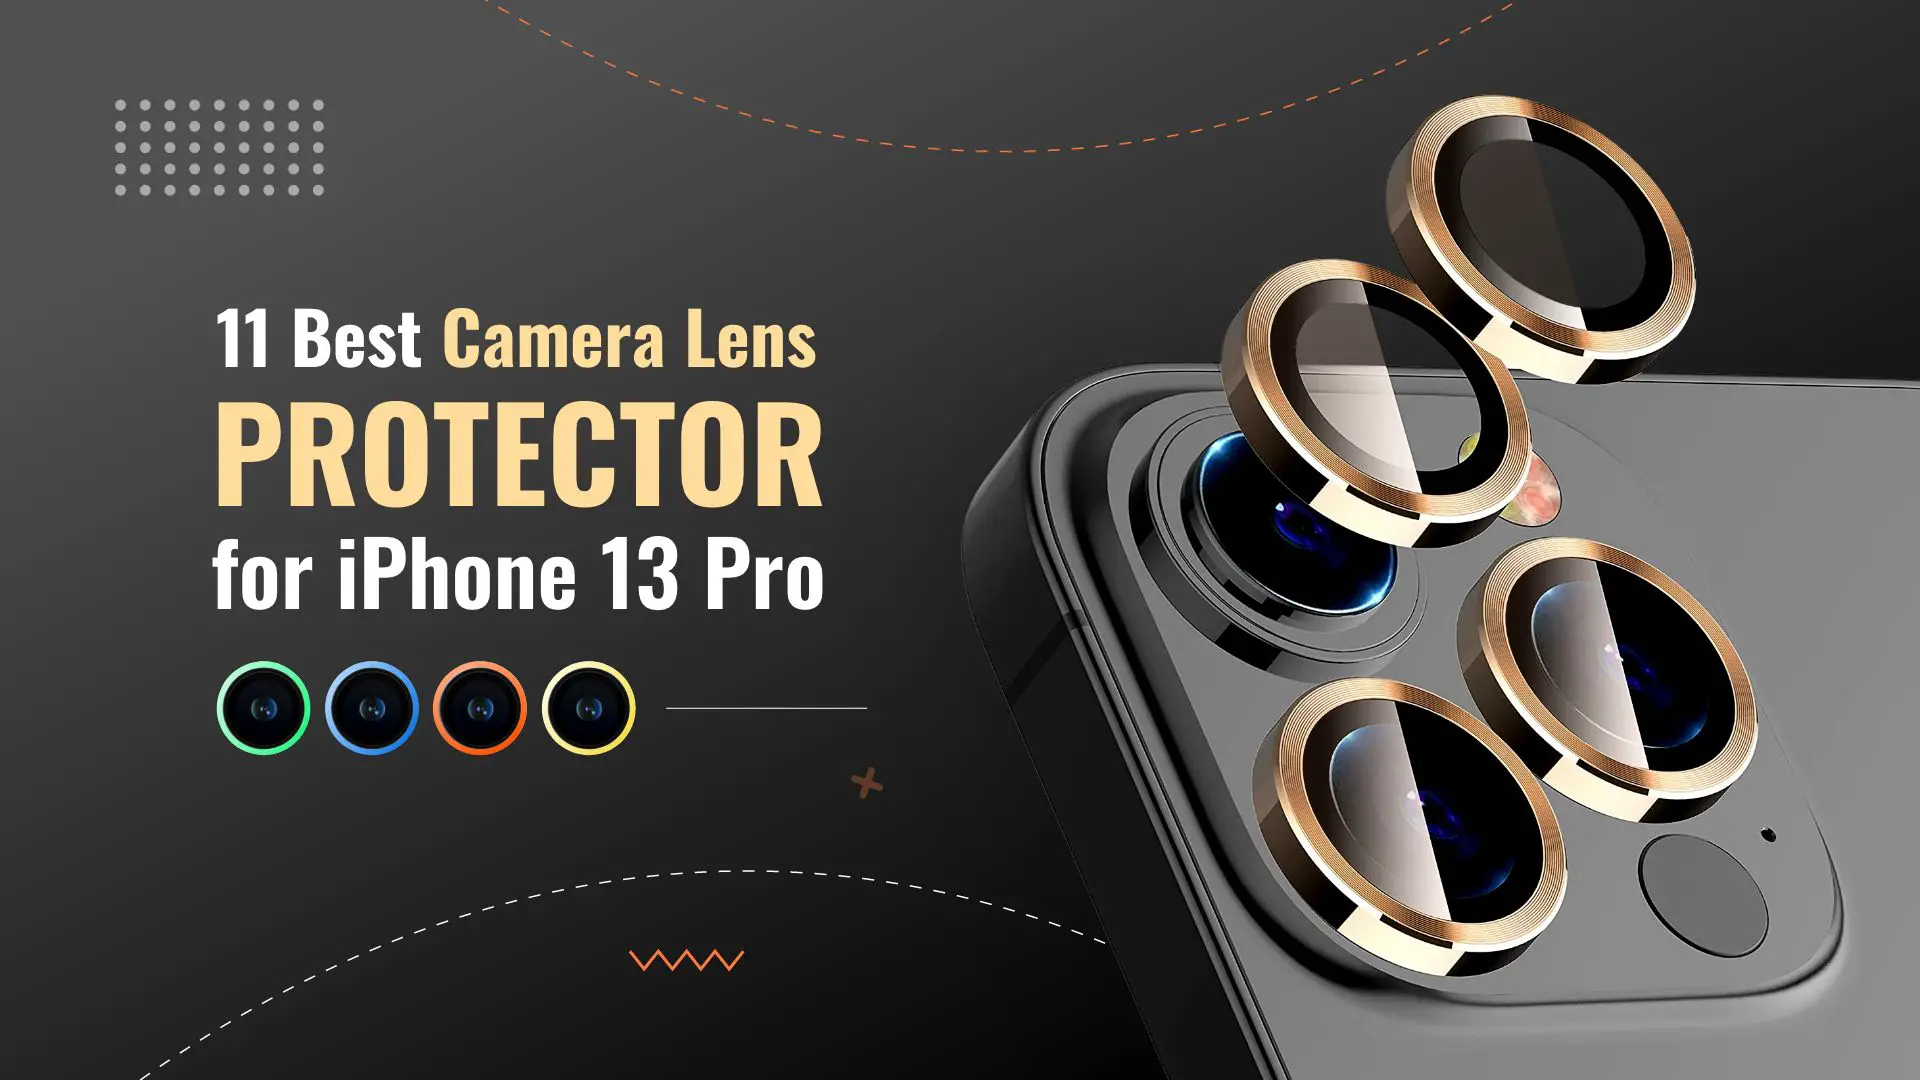 11 Best Camera Lens Protector for iPhone 13 Pro in 2022